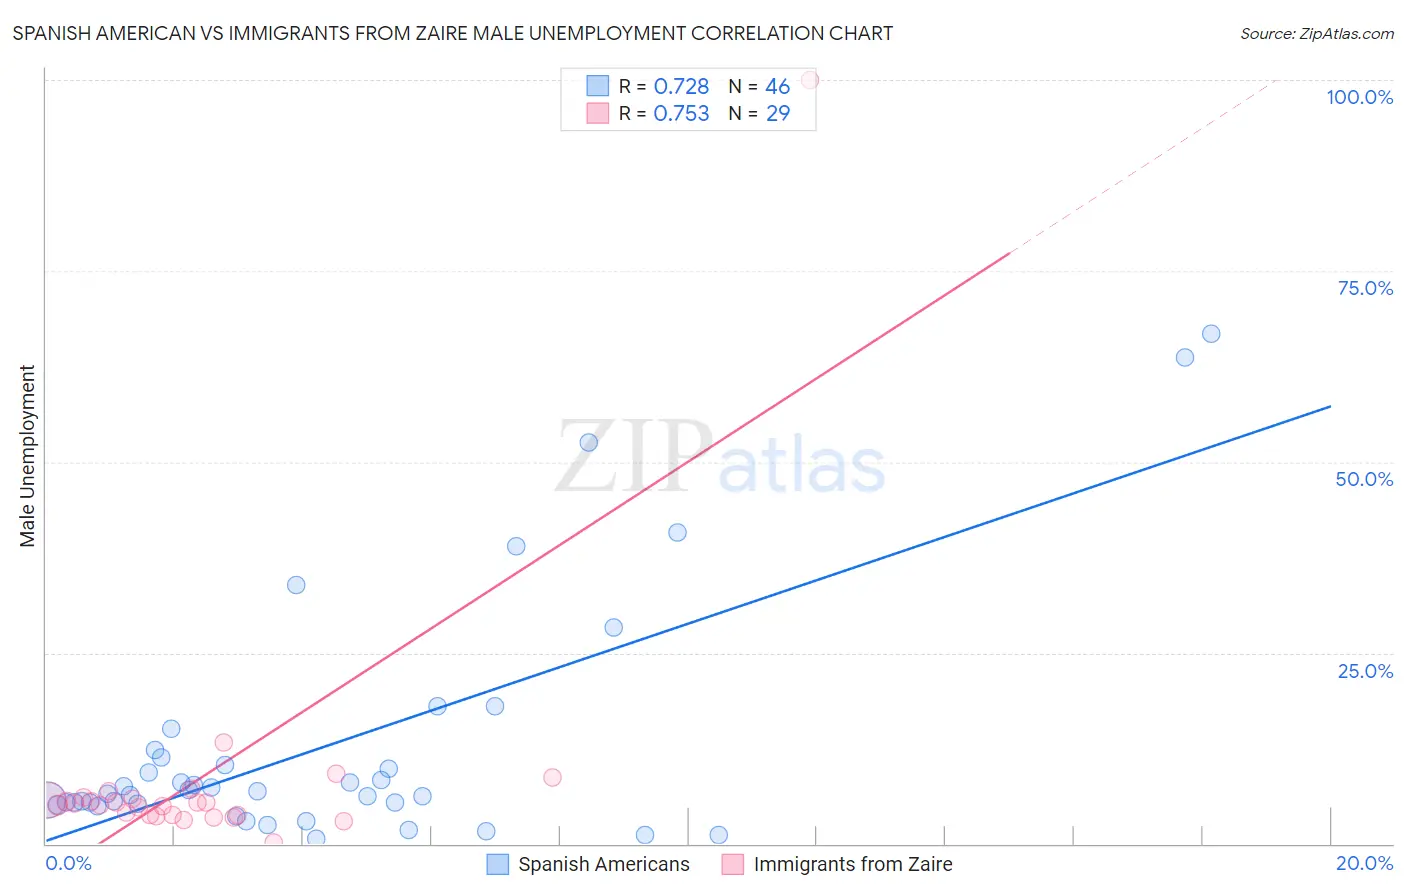 Spanish American vs Immigrants from Zaire Male Unemployment